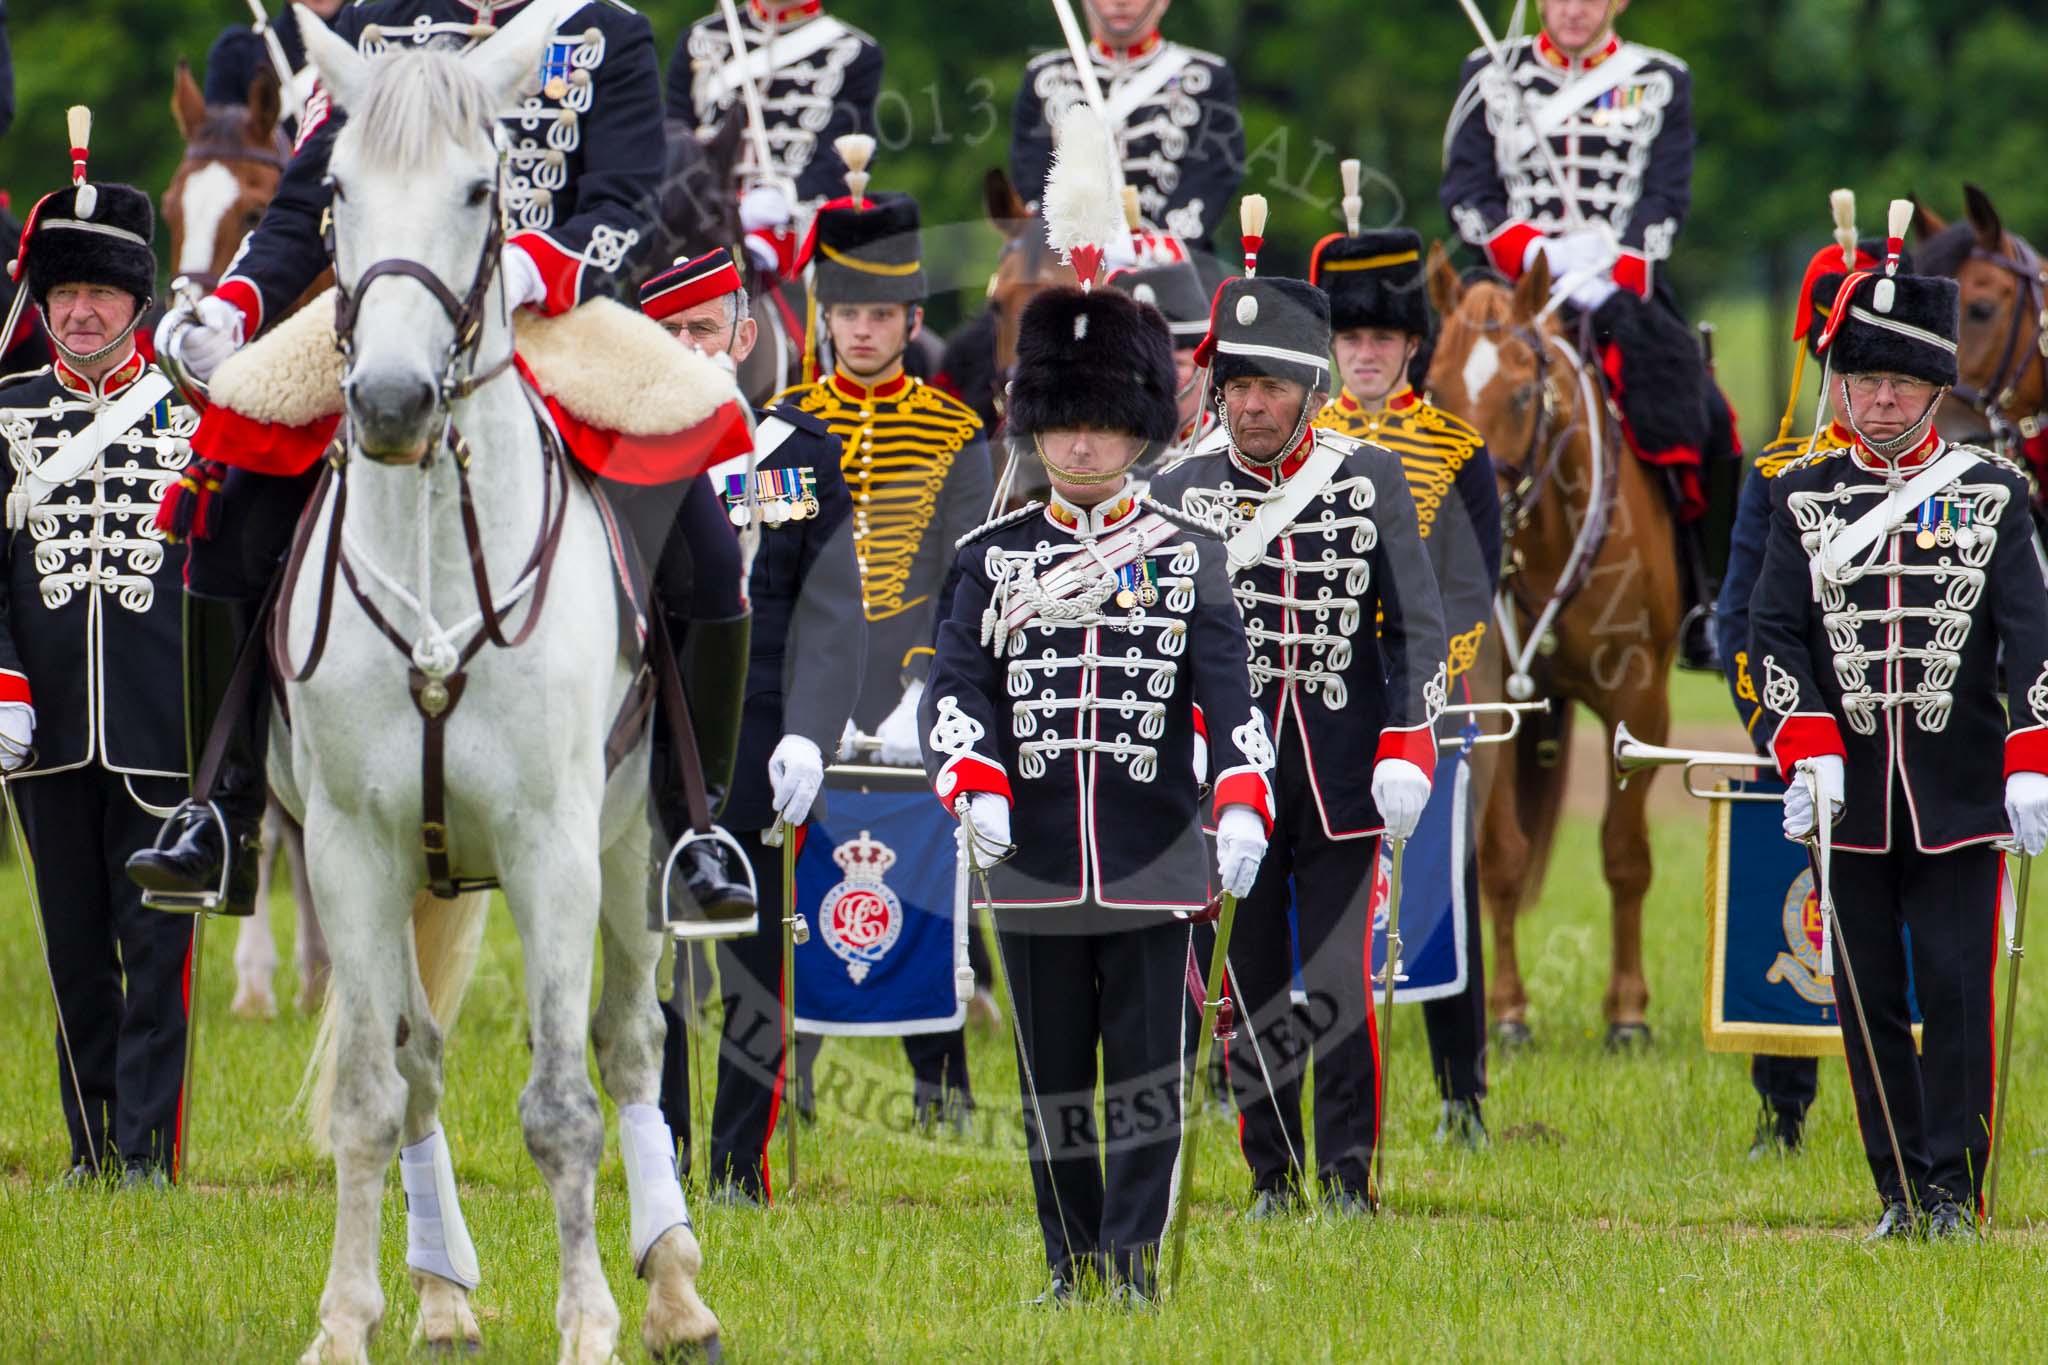 The Light Cavalry HAC Annual Review and Inspection 2013.
Windsor Great Park Review Ground,
Windsor,
Berkshire,
United Kingdom,
on 09 June 2013 at 13:06, image #315